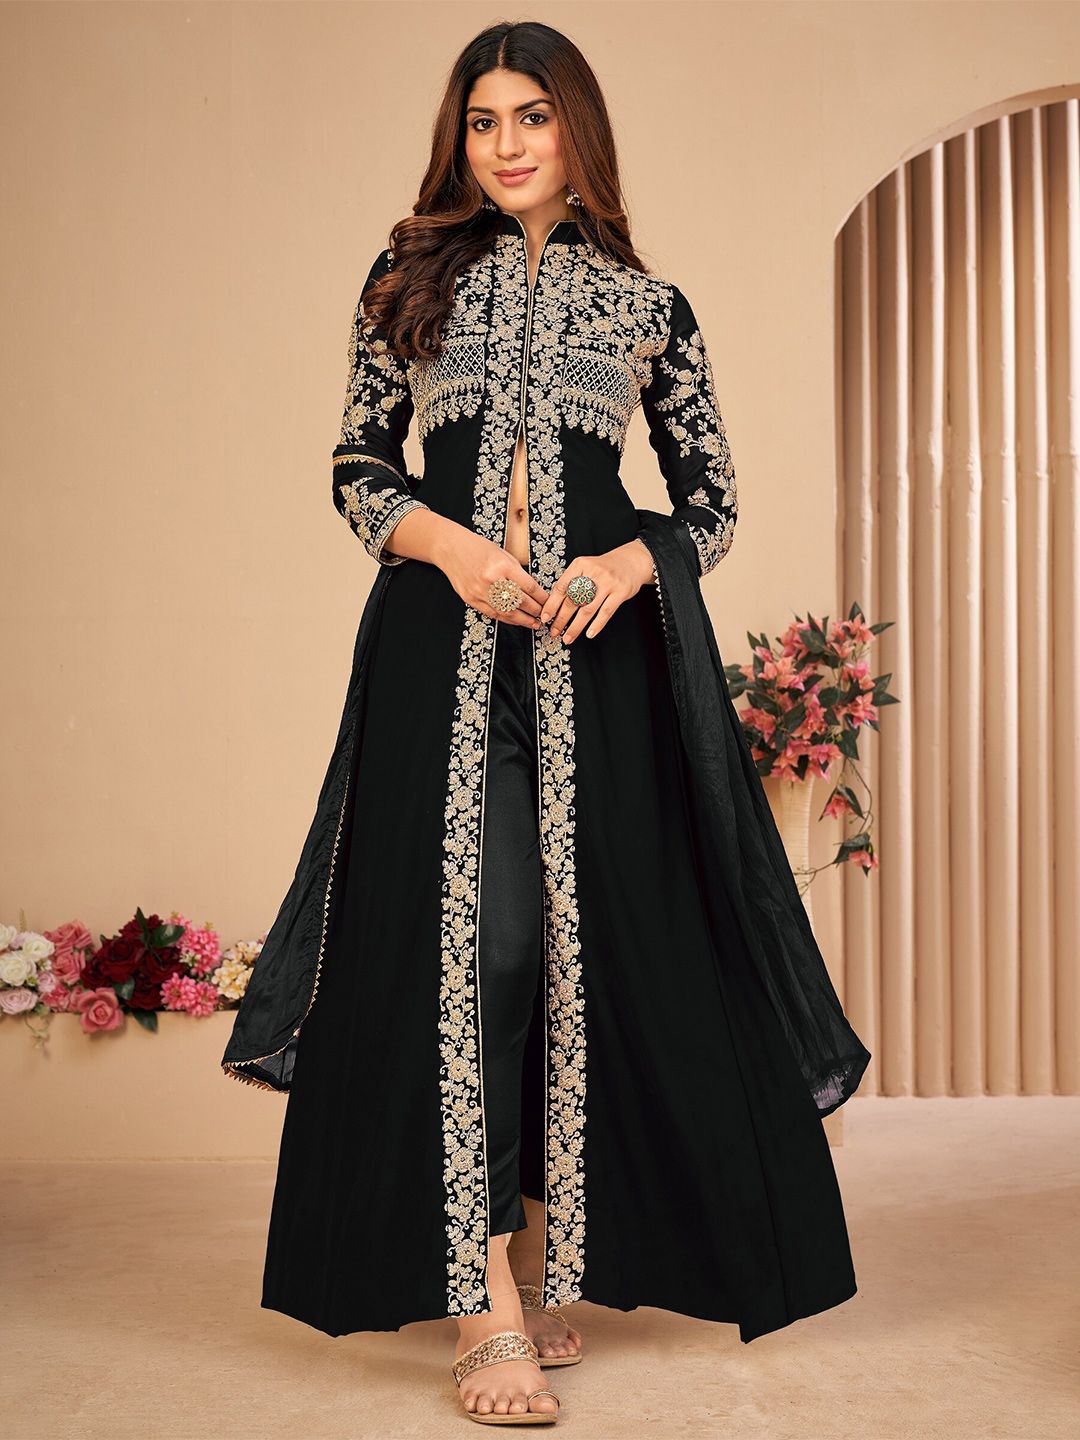 Divine International Trading Co Black & Silver-Toned Embroidered Unstitched Dress Material Price in India